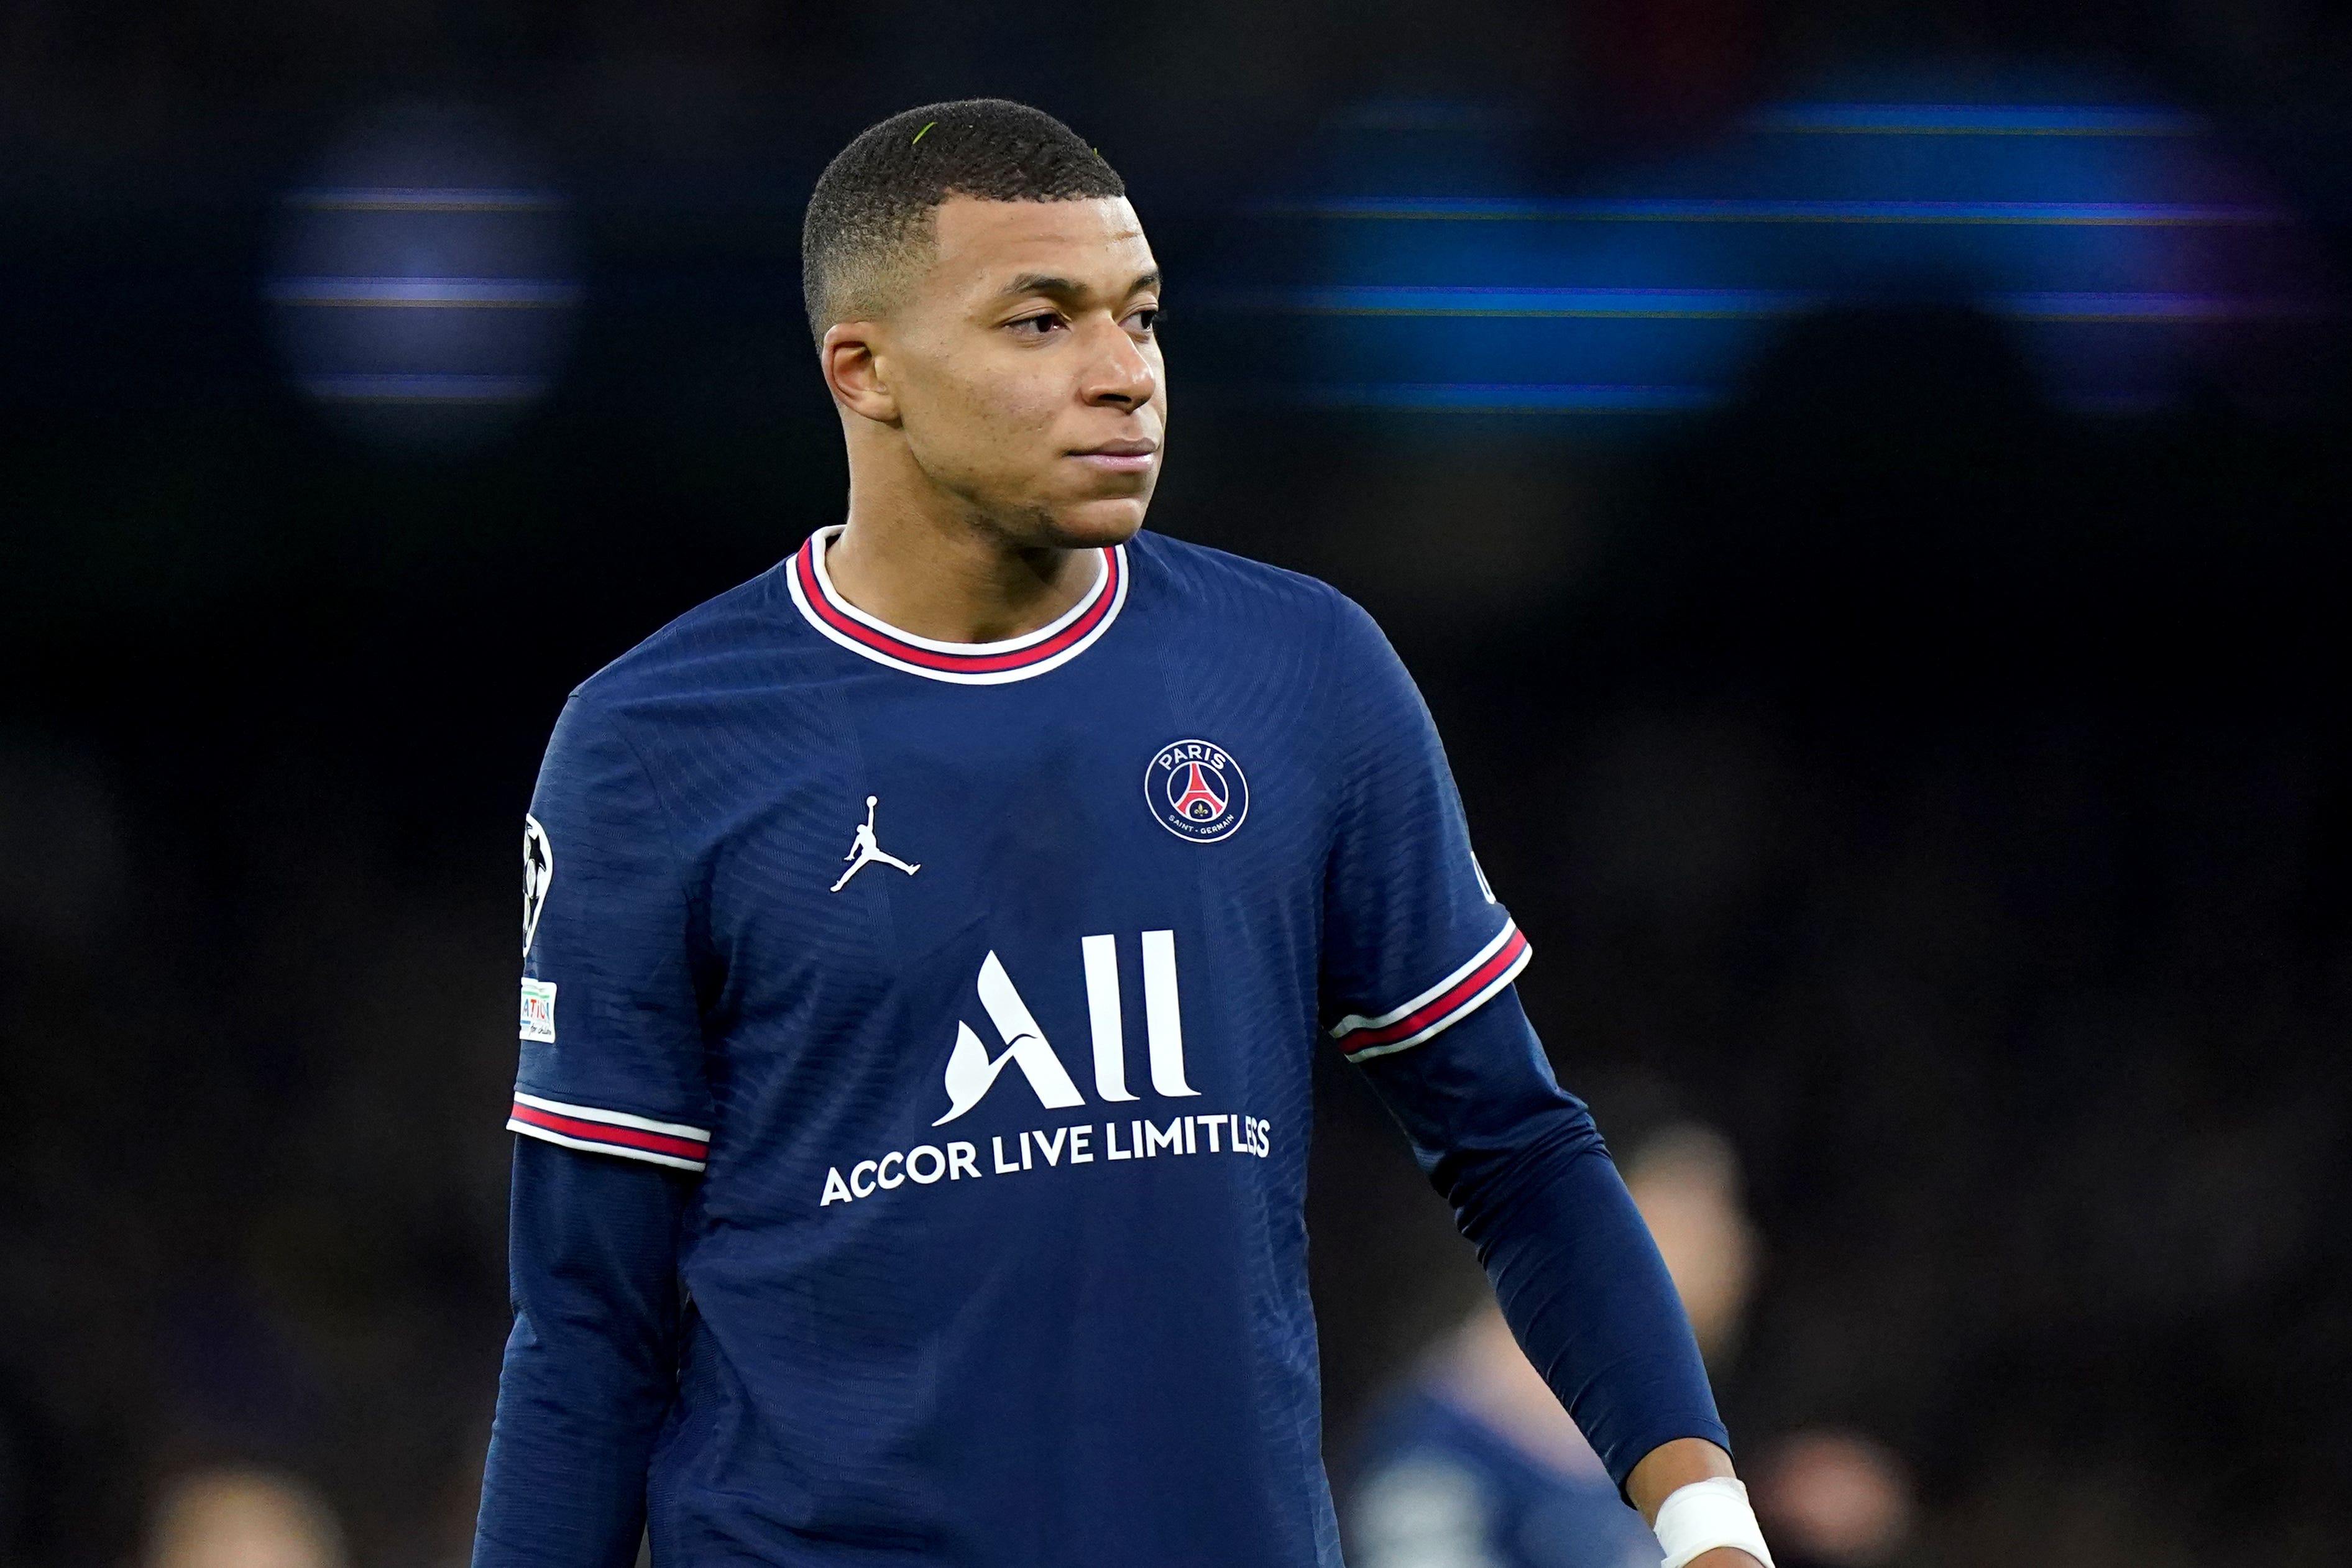 Kylian Mbappe to be available against Nice, says PSG boss Luis Enrique